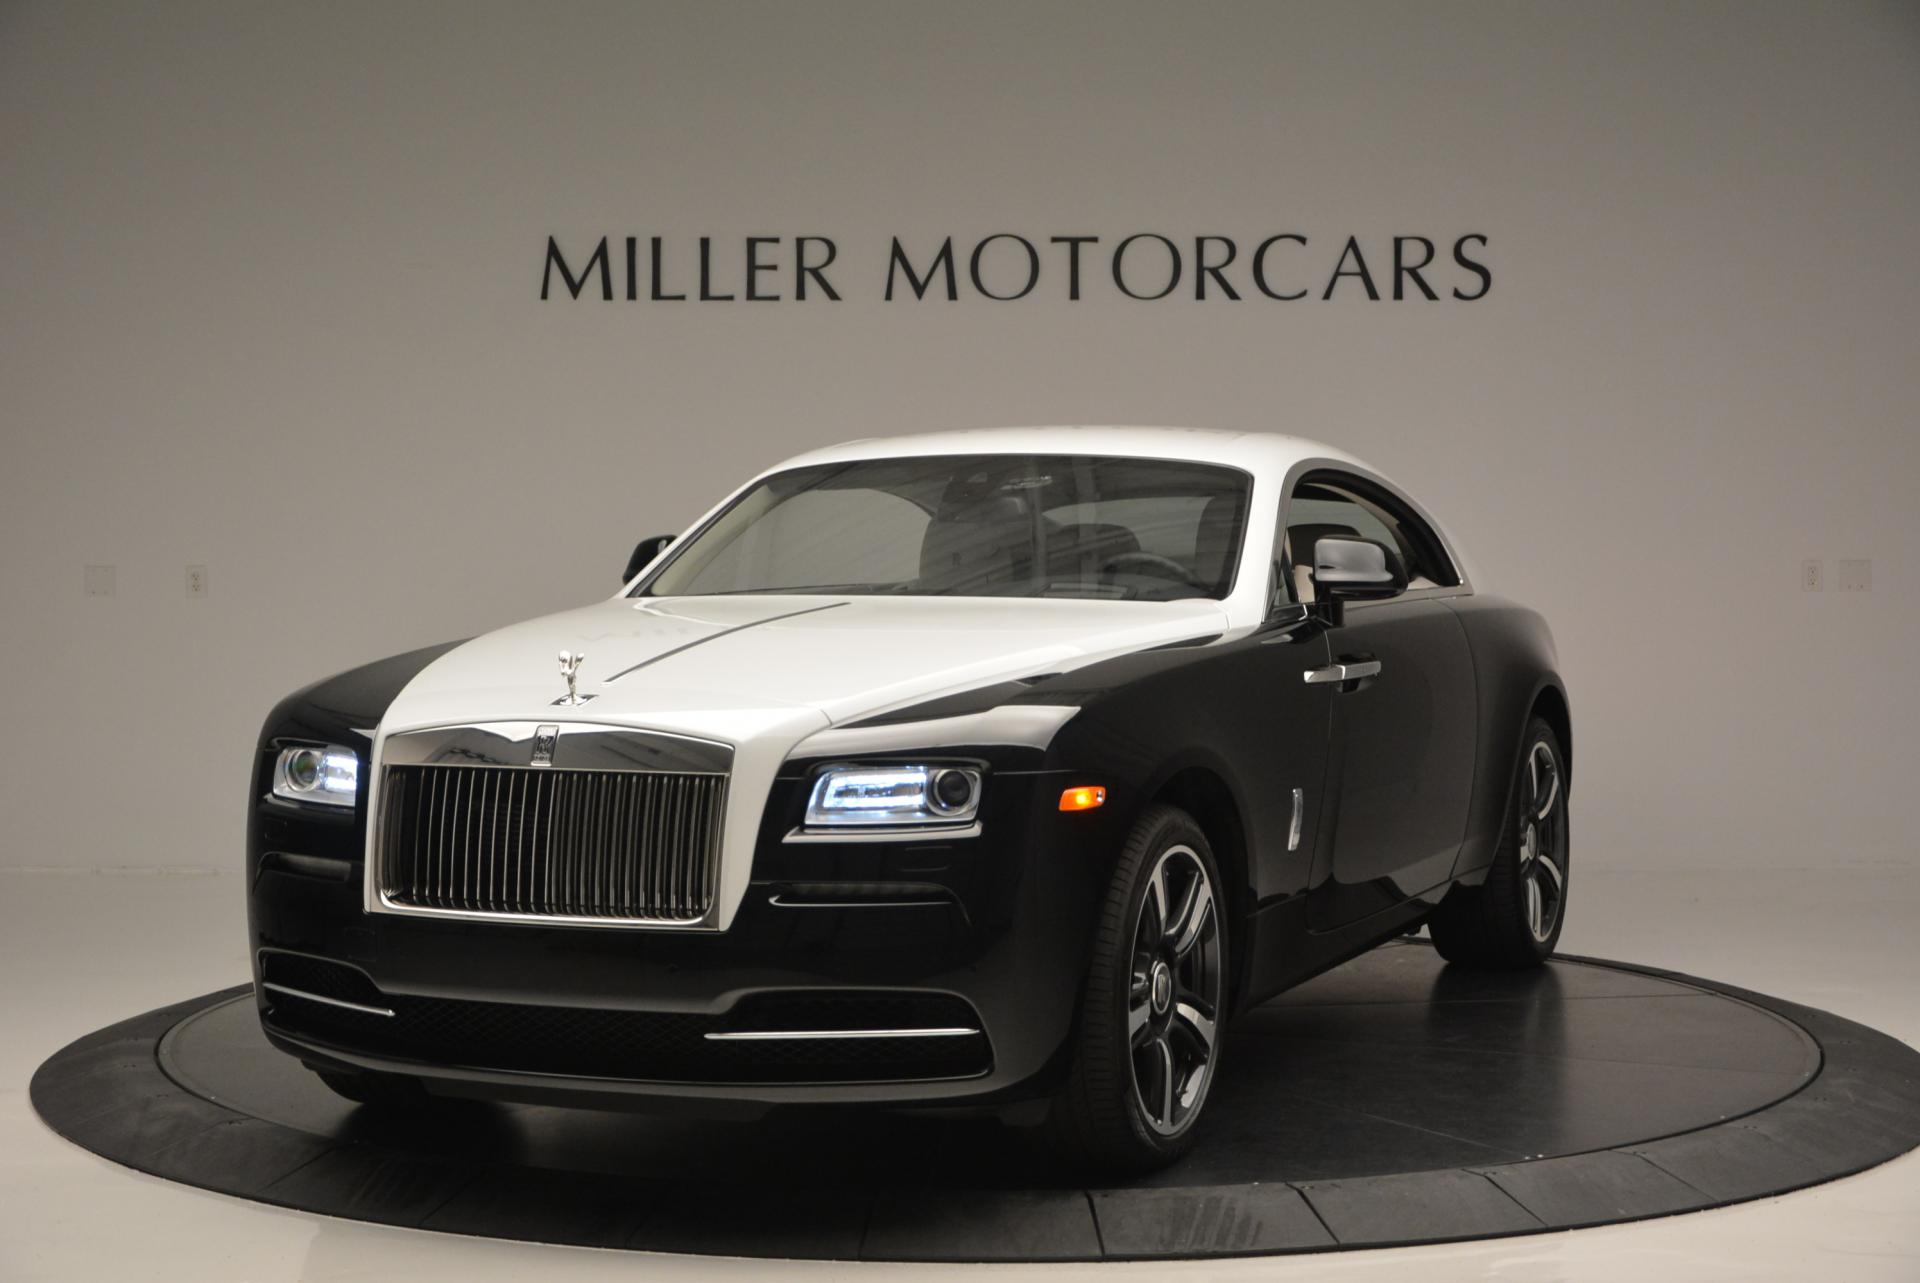 New 2016 Rolls-Royce Wraith for sale Sold at McLaren Greenwich in Greenwich CT 06830 1